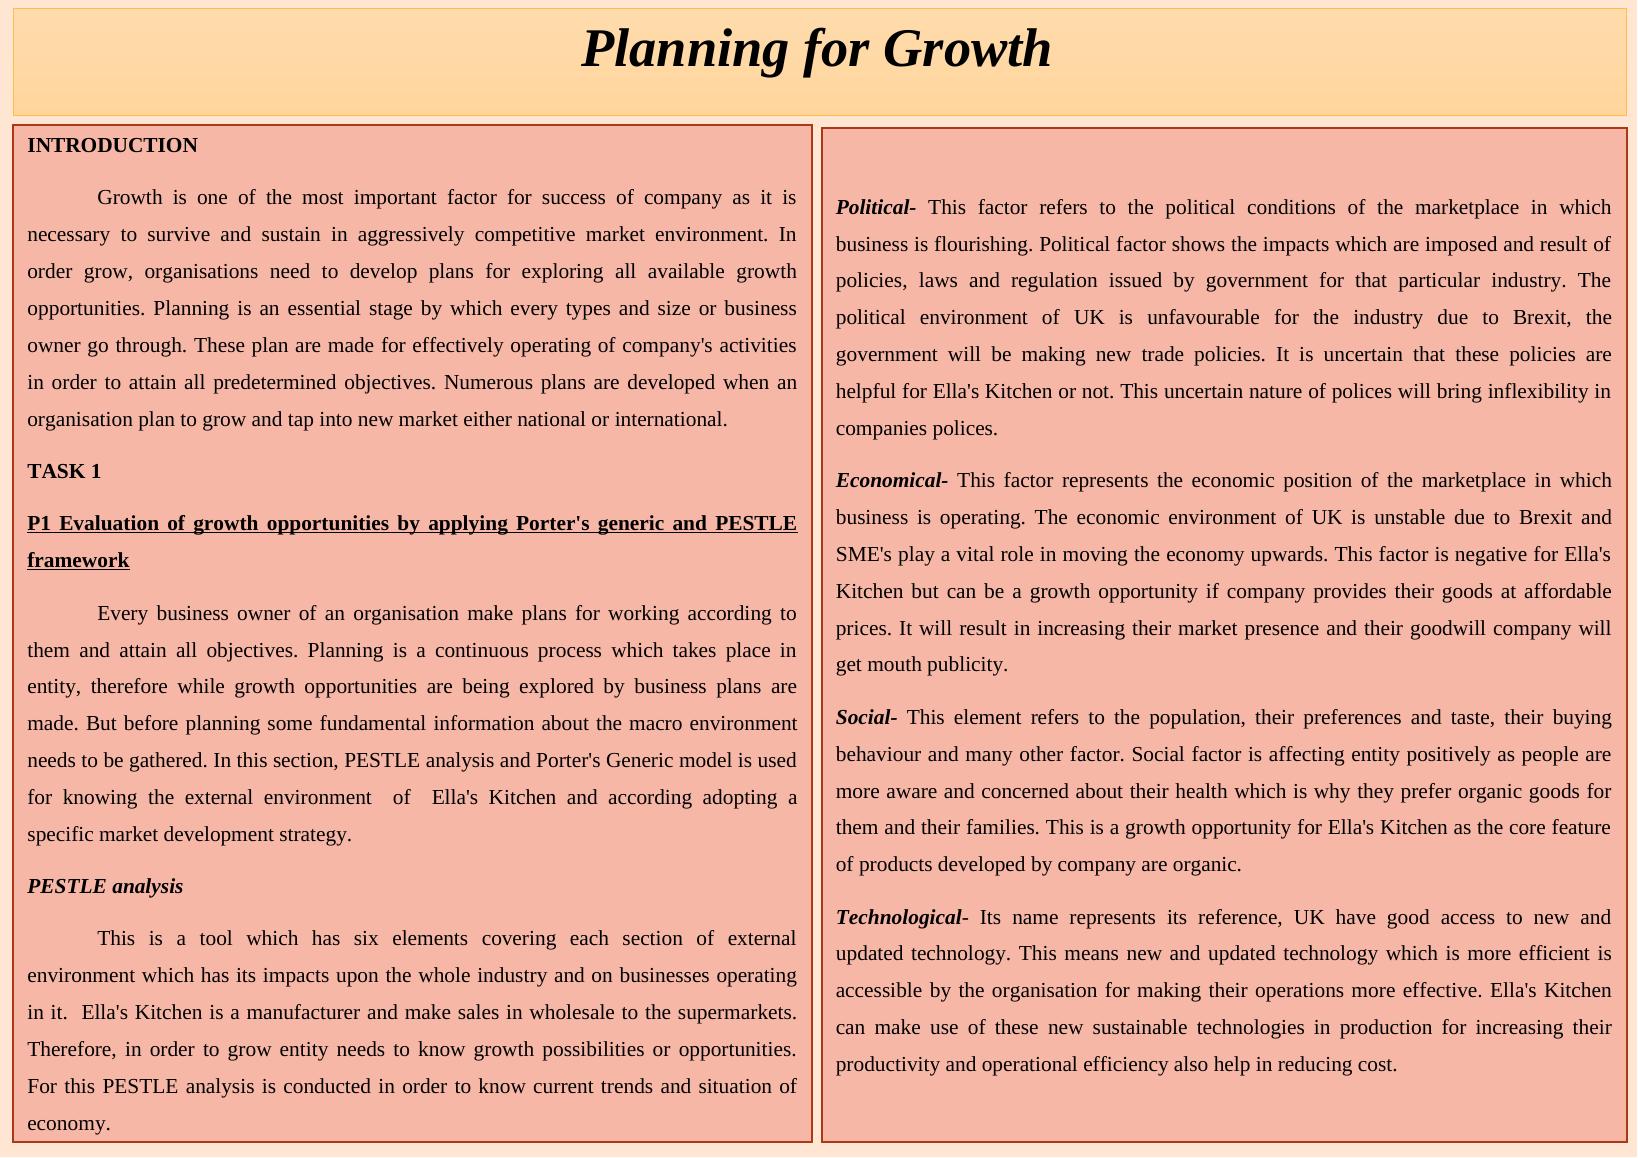 Planning for Growth: Analysis of Growth Opportunities and Funding Sources for Ella's Kitchen_1